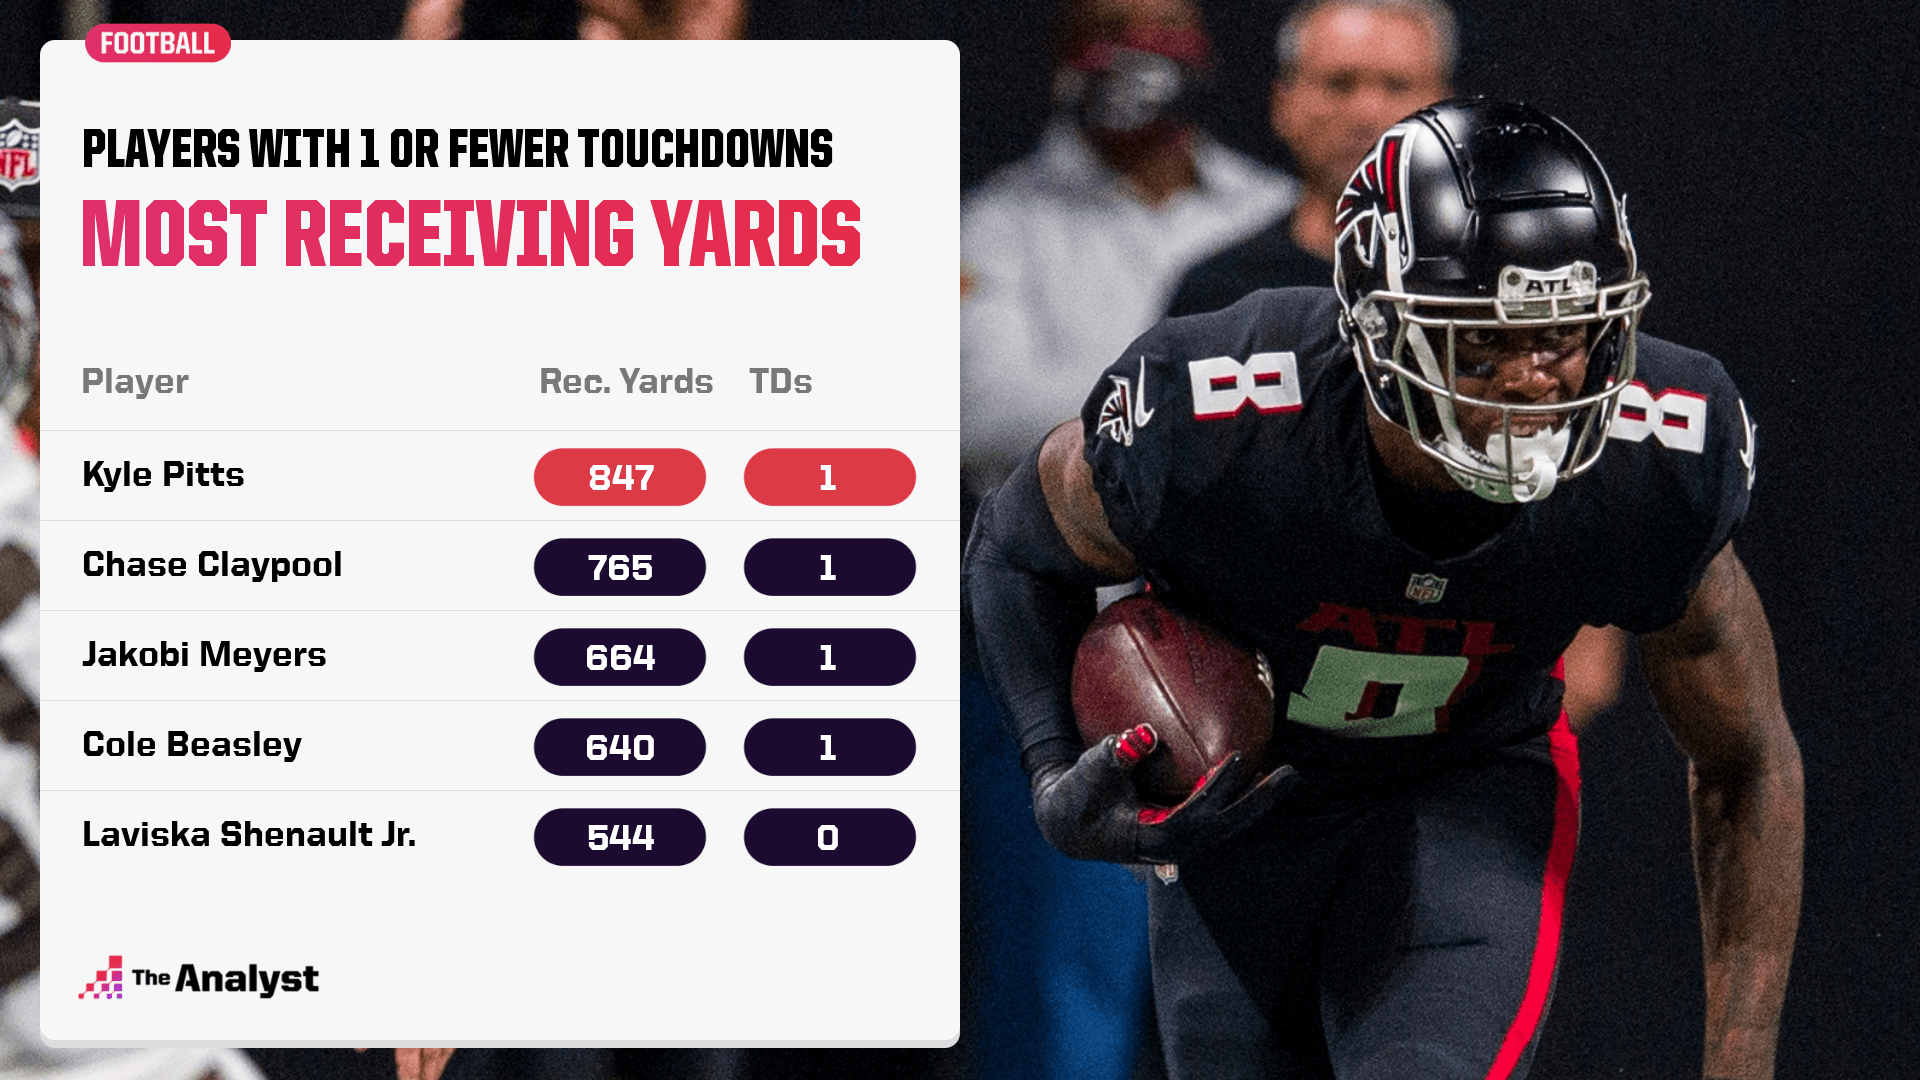 Receiving Yards and fewer than one touchdown